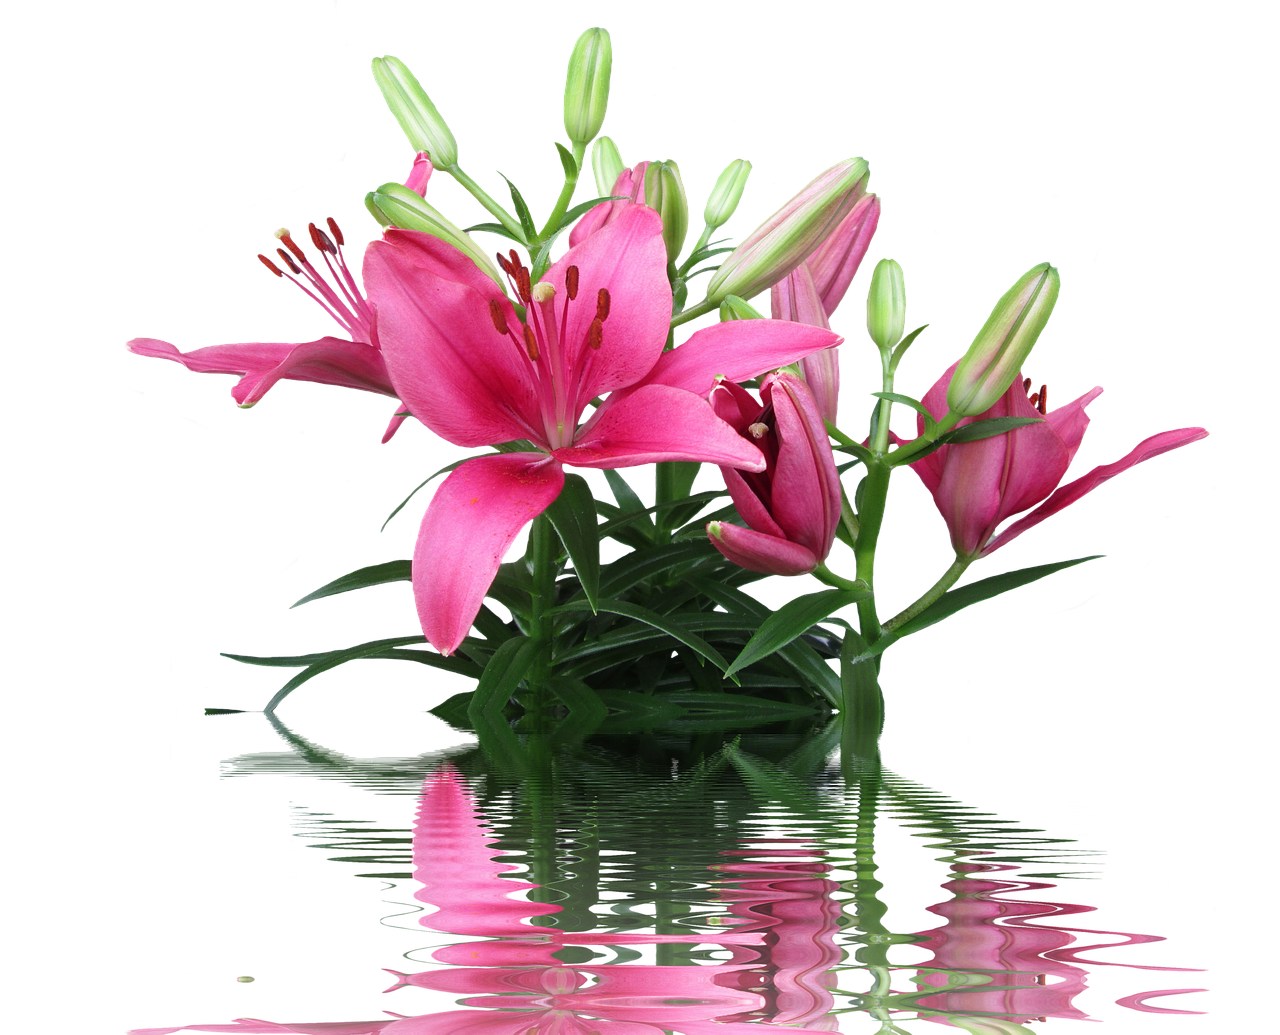 A Pink Lily Flowers And Buds In Water